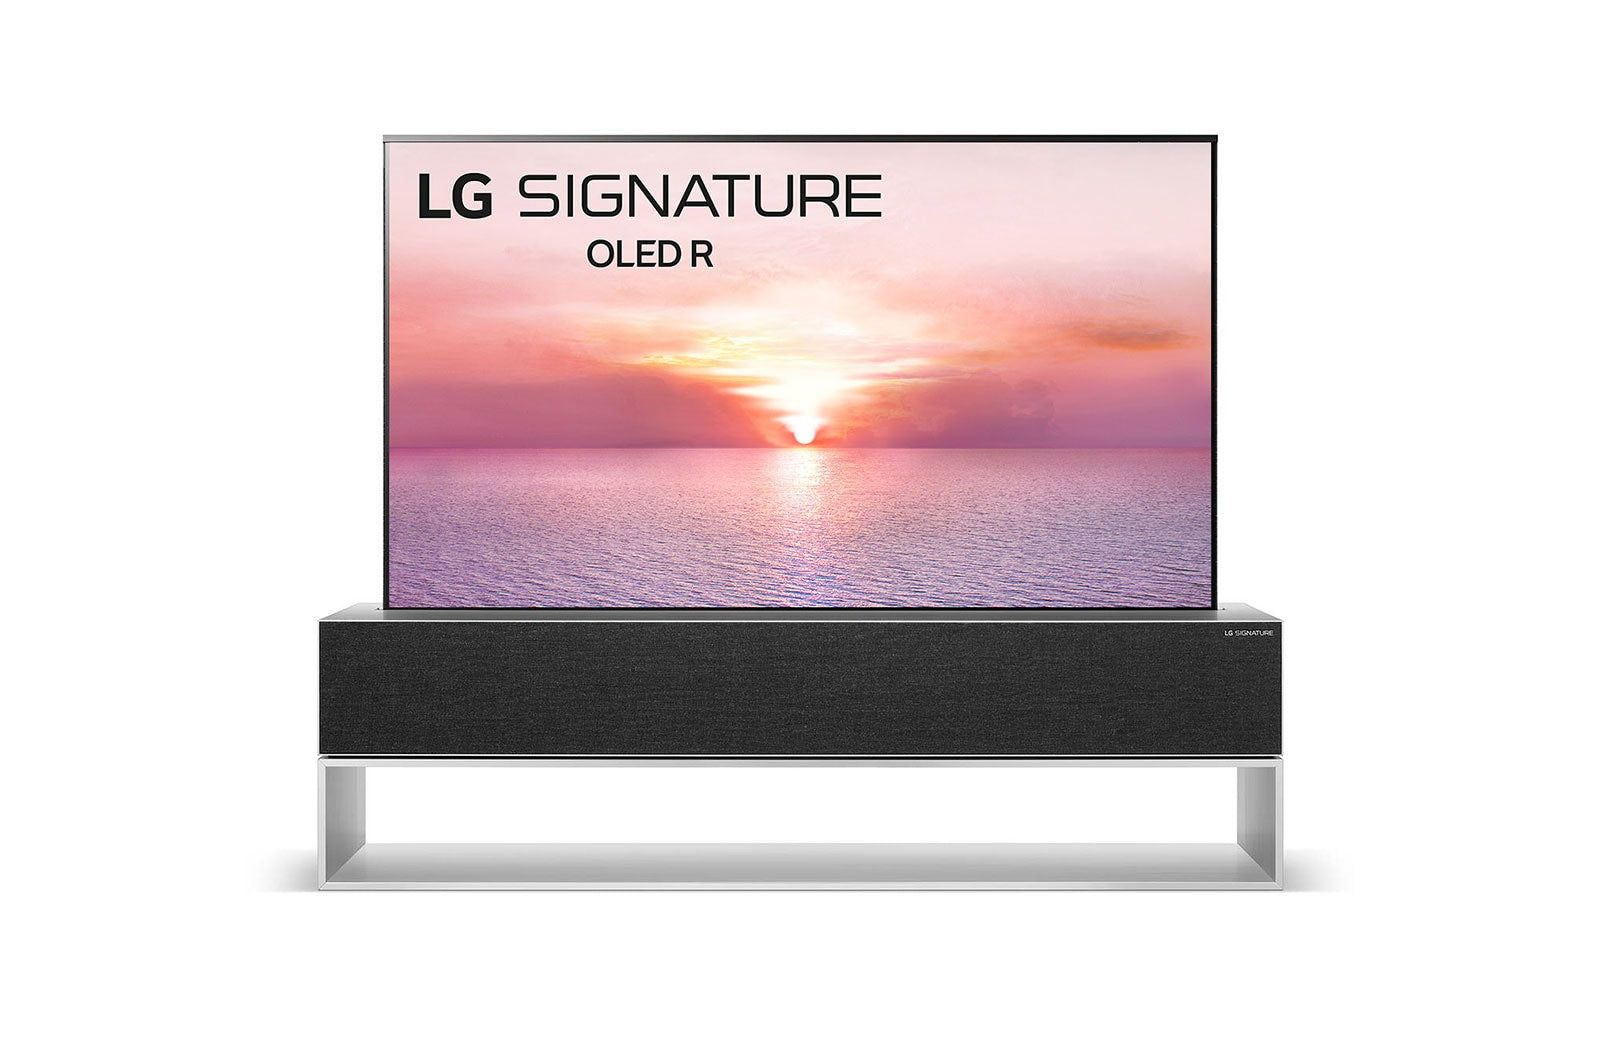 LG SIGNATURE 65 Inch 4K Smart OLED Rollable webOS 22 ThinQ AI TV